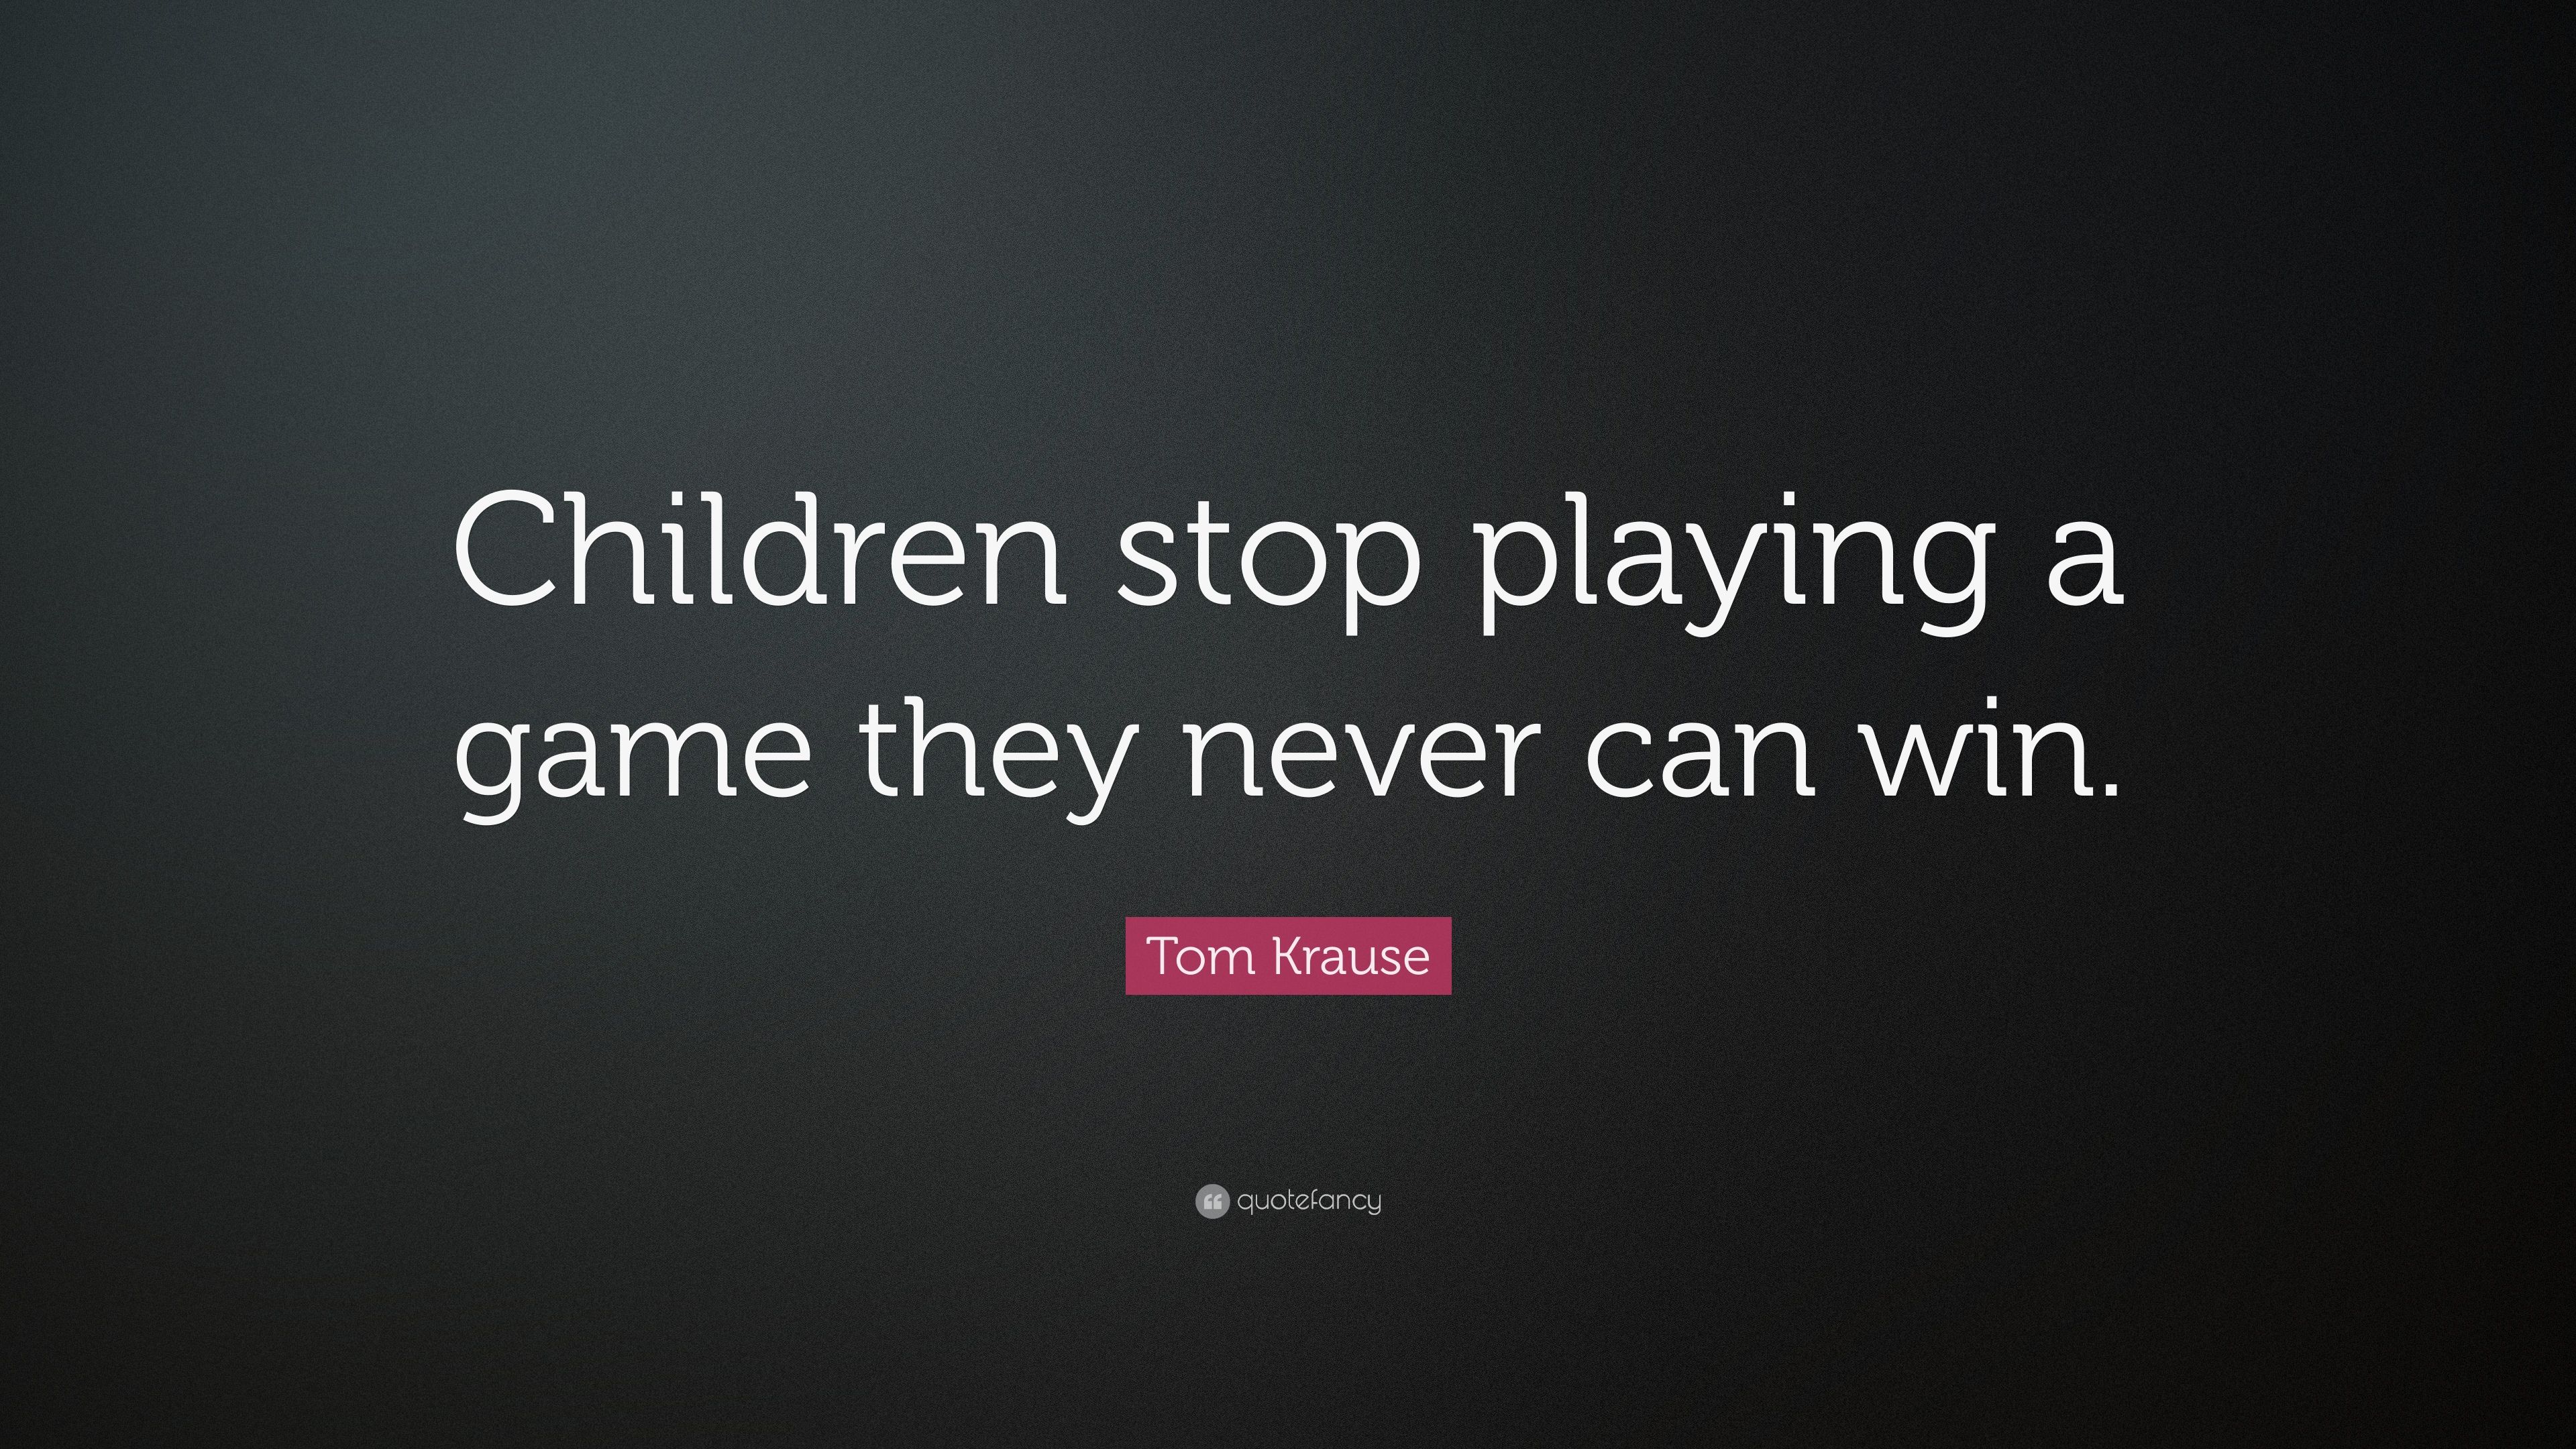 Tom Krause Quote: “Children stop playing a game they never can win